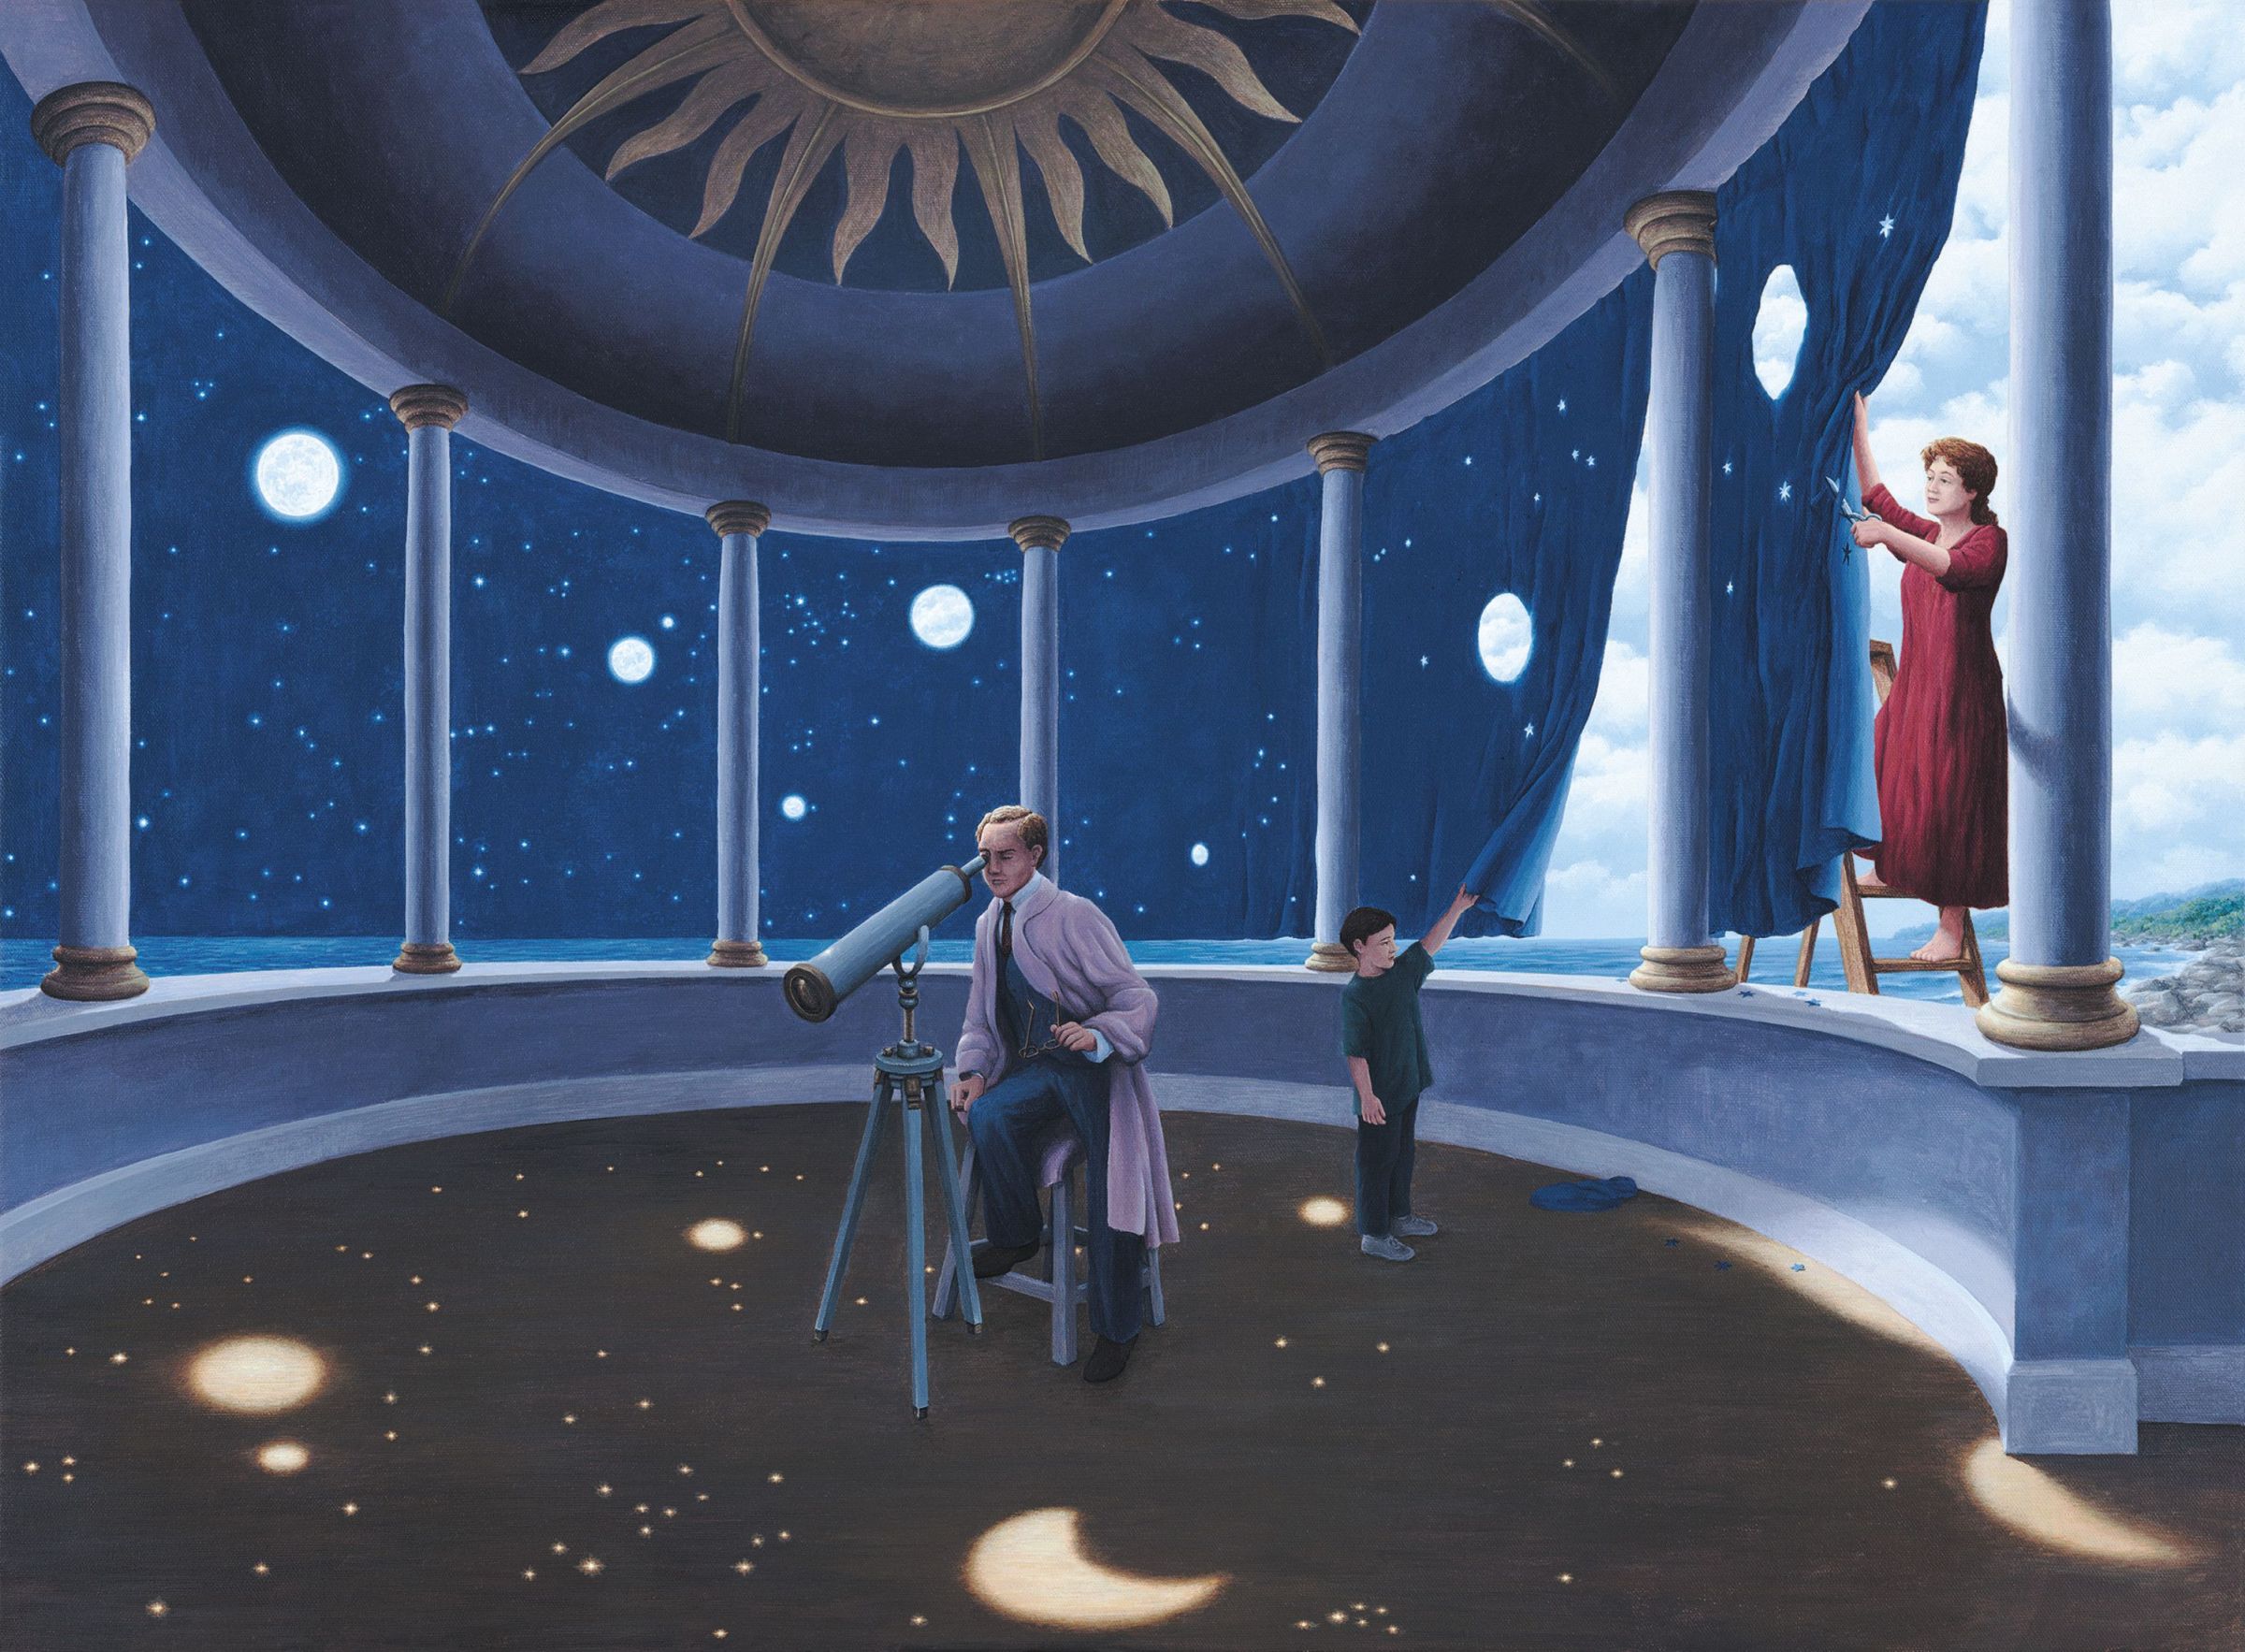 Astral Projections, Rob Gonsalves, acrylic, 2008.jpg